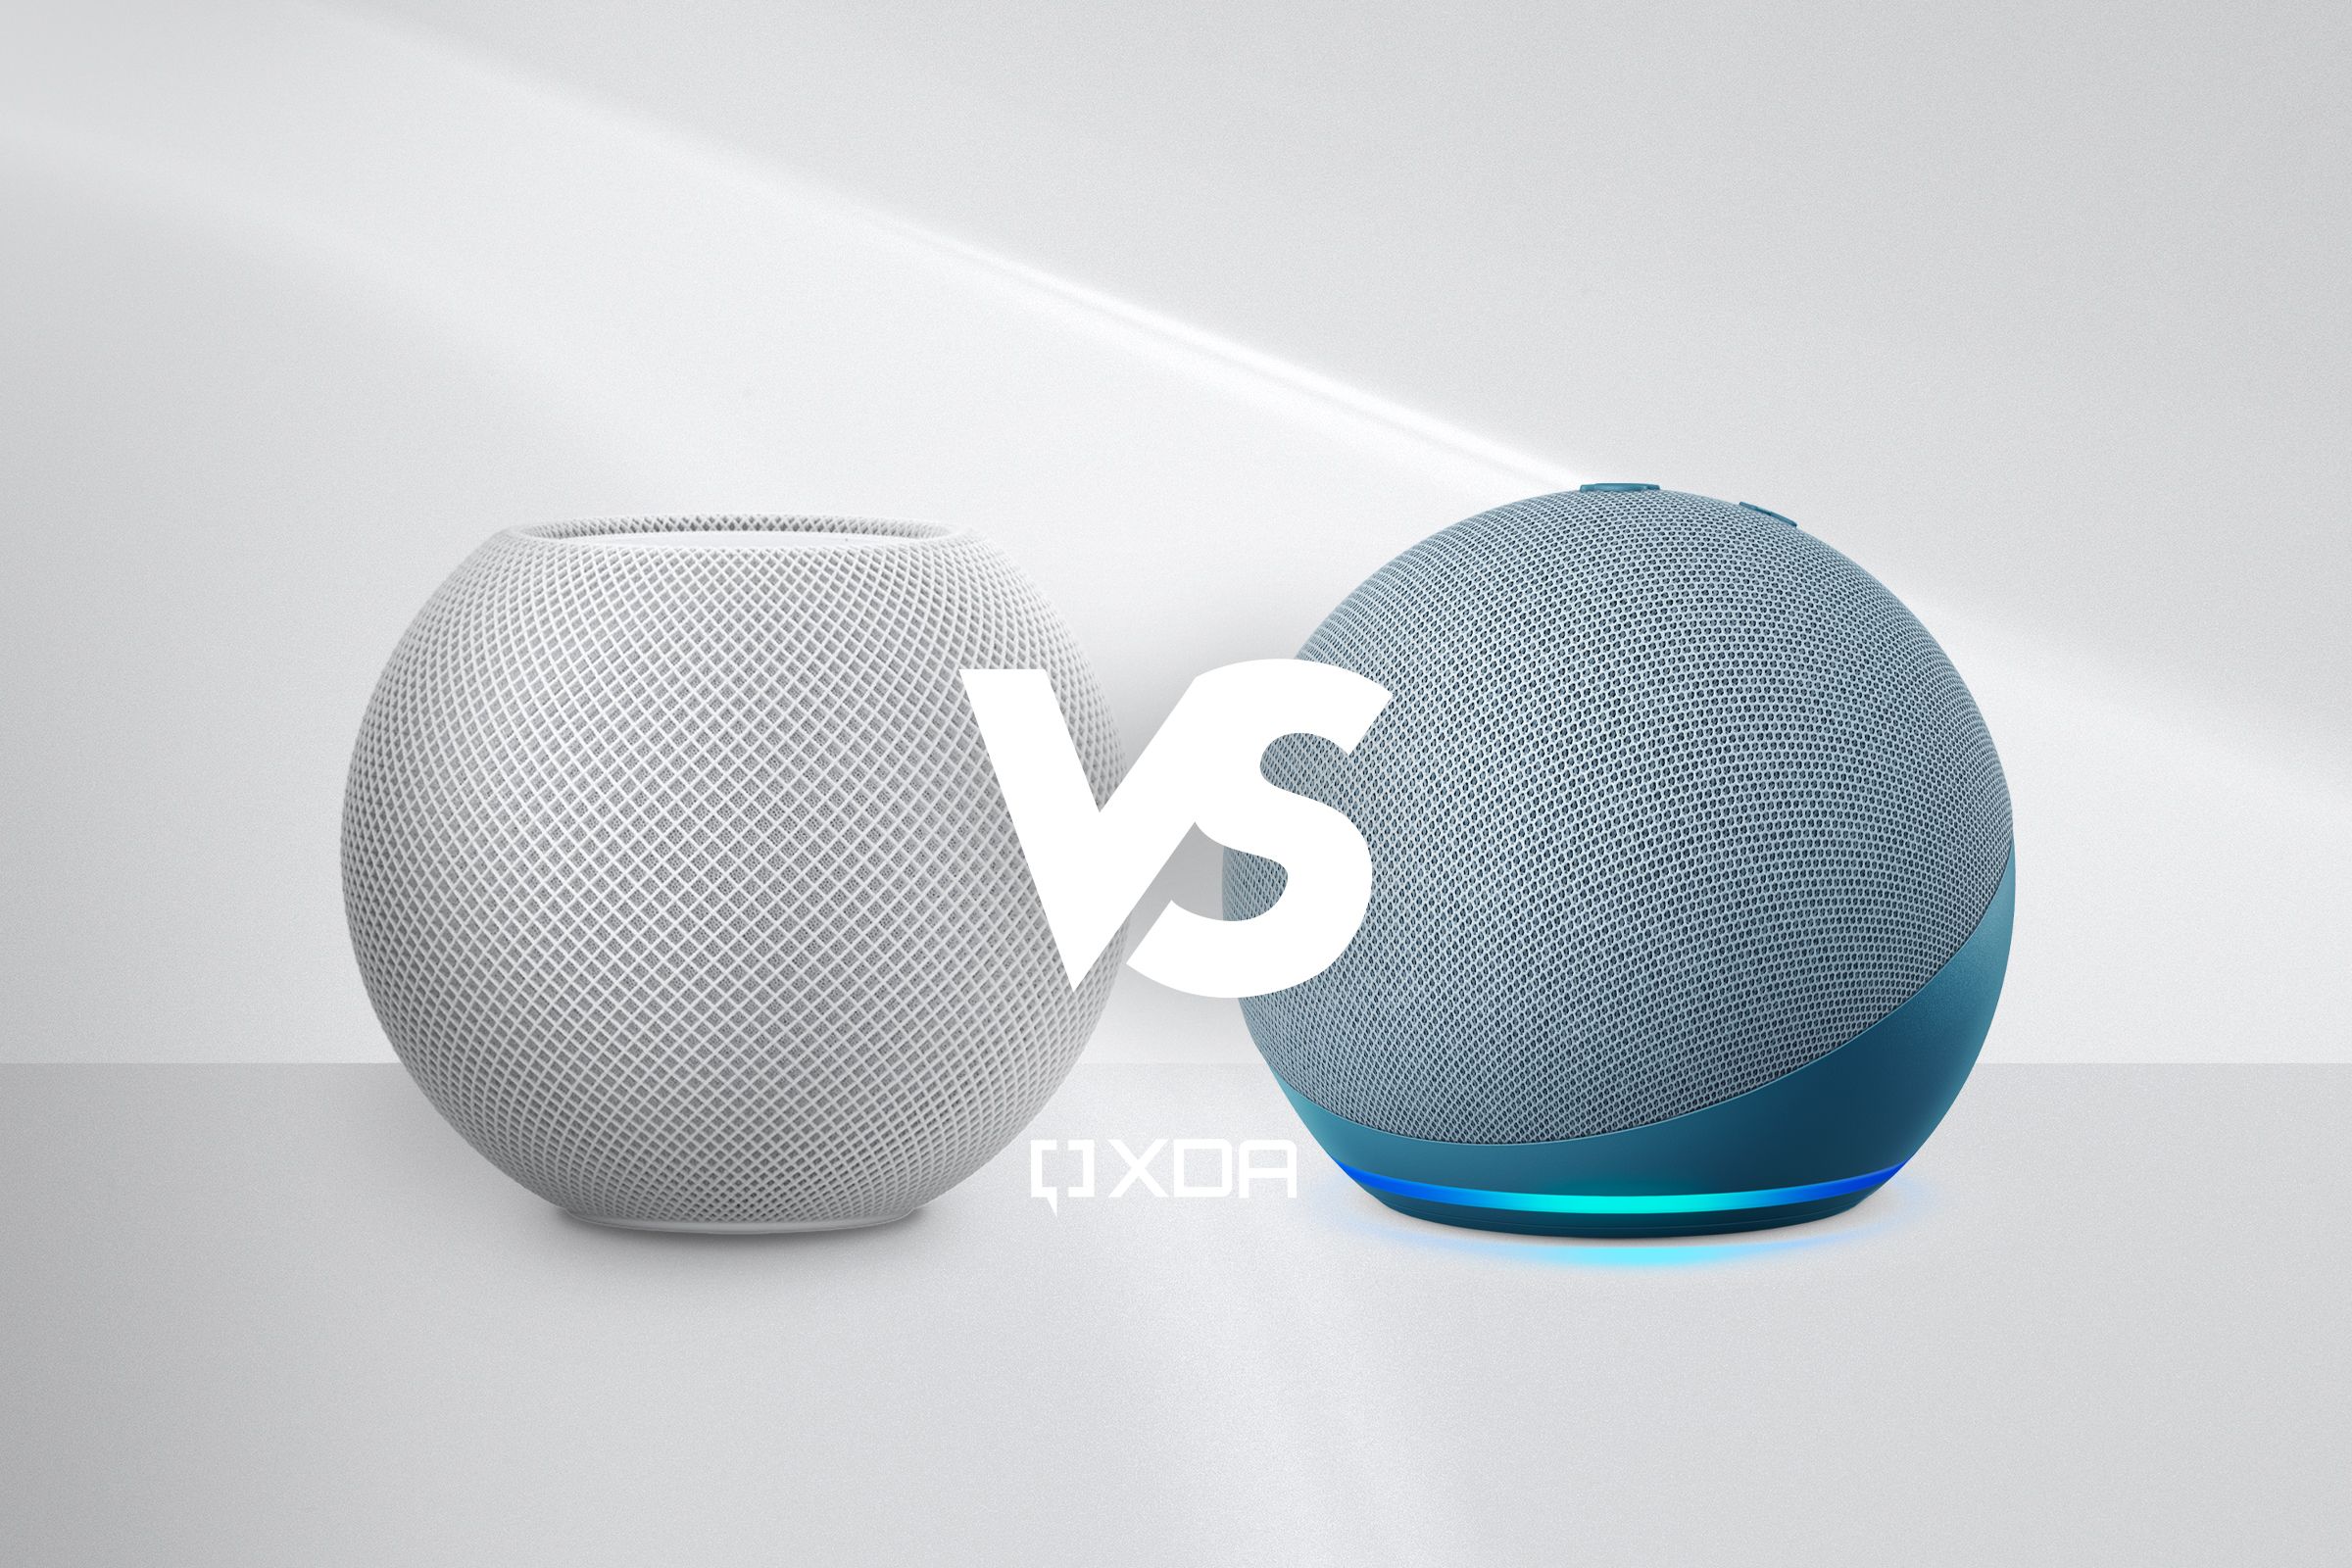 HomePod Mini vs. Echo Dot on a gradient background with the XDA logo